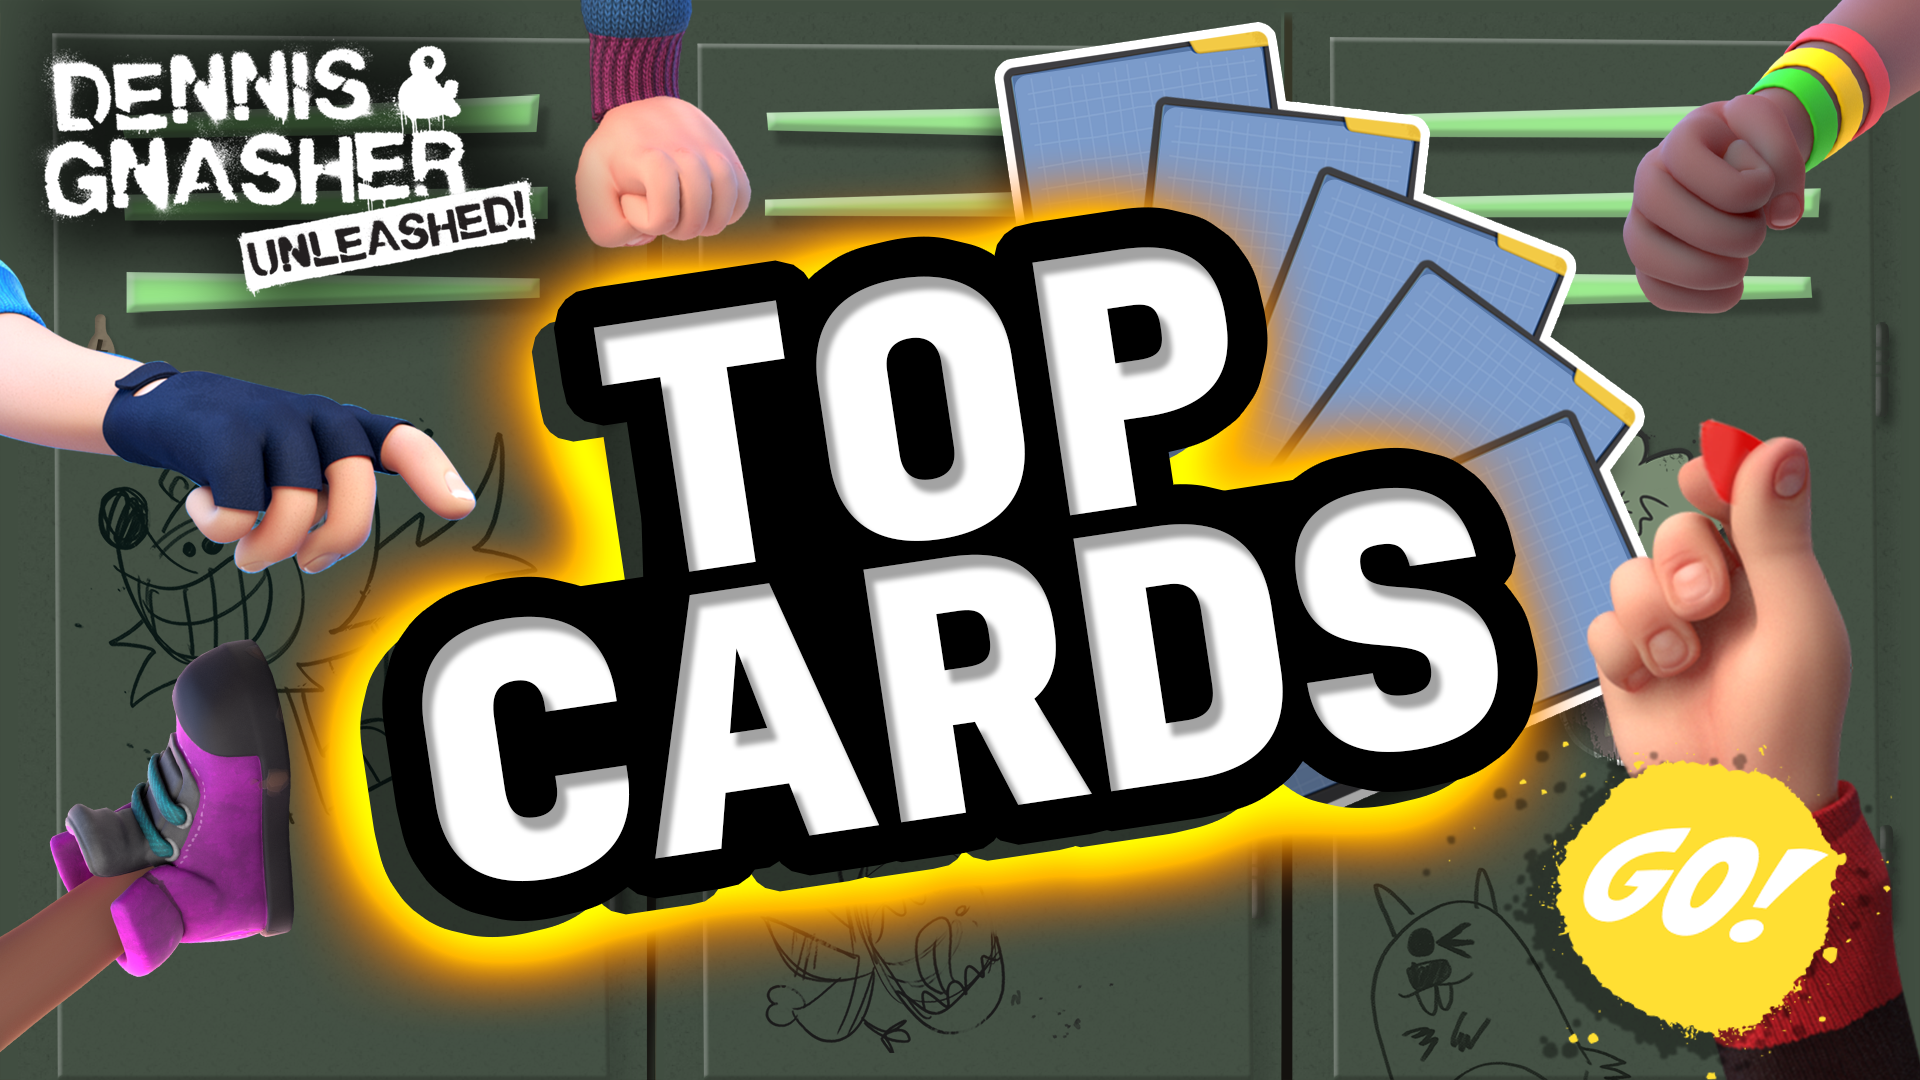 PLAY Top Cards | Dennis & Gnasher Unleashed